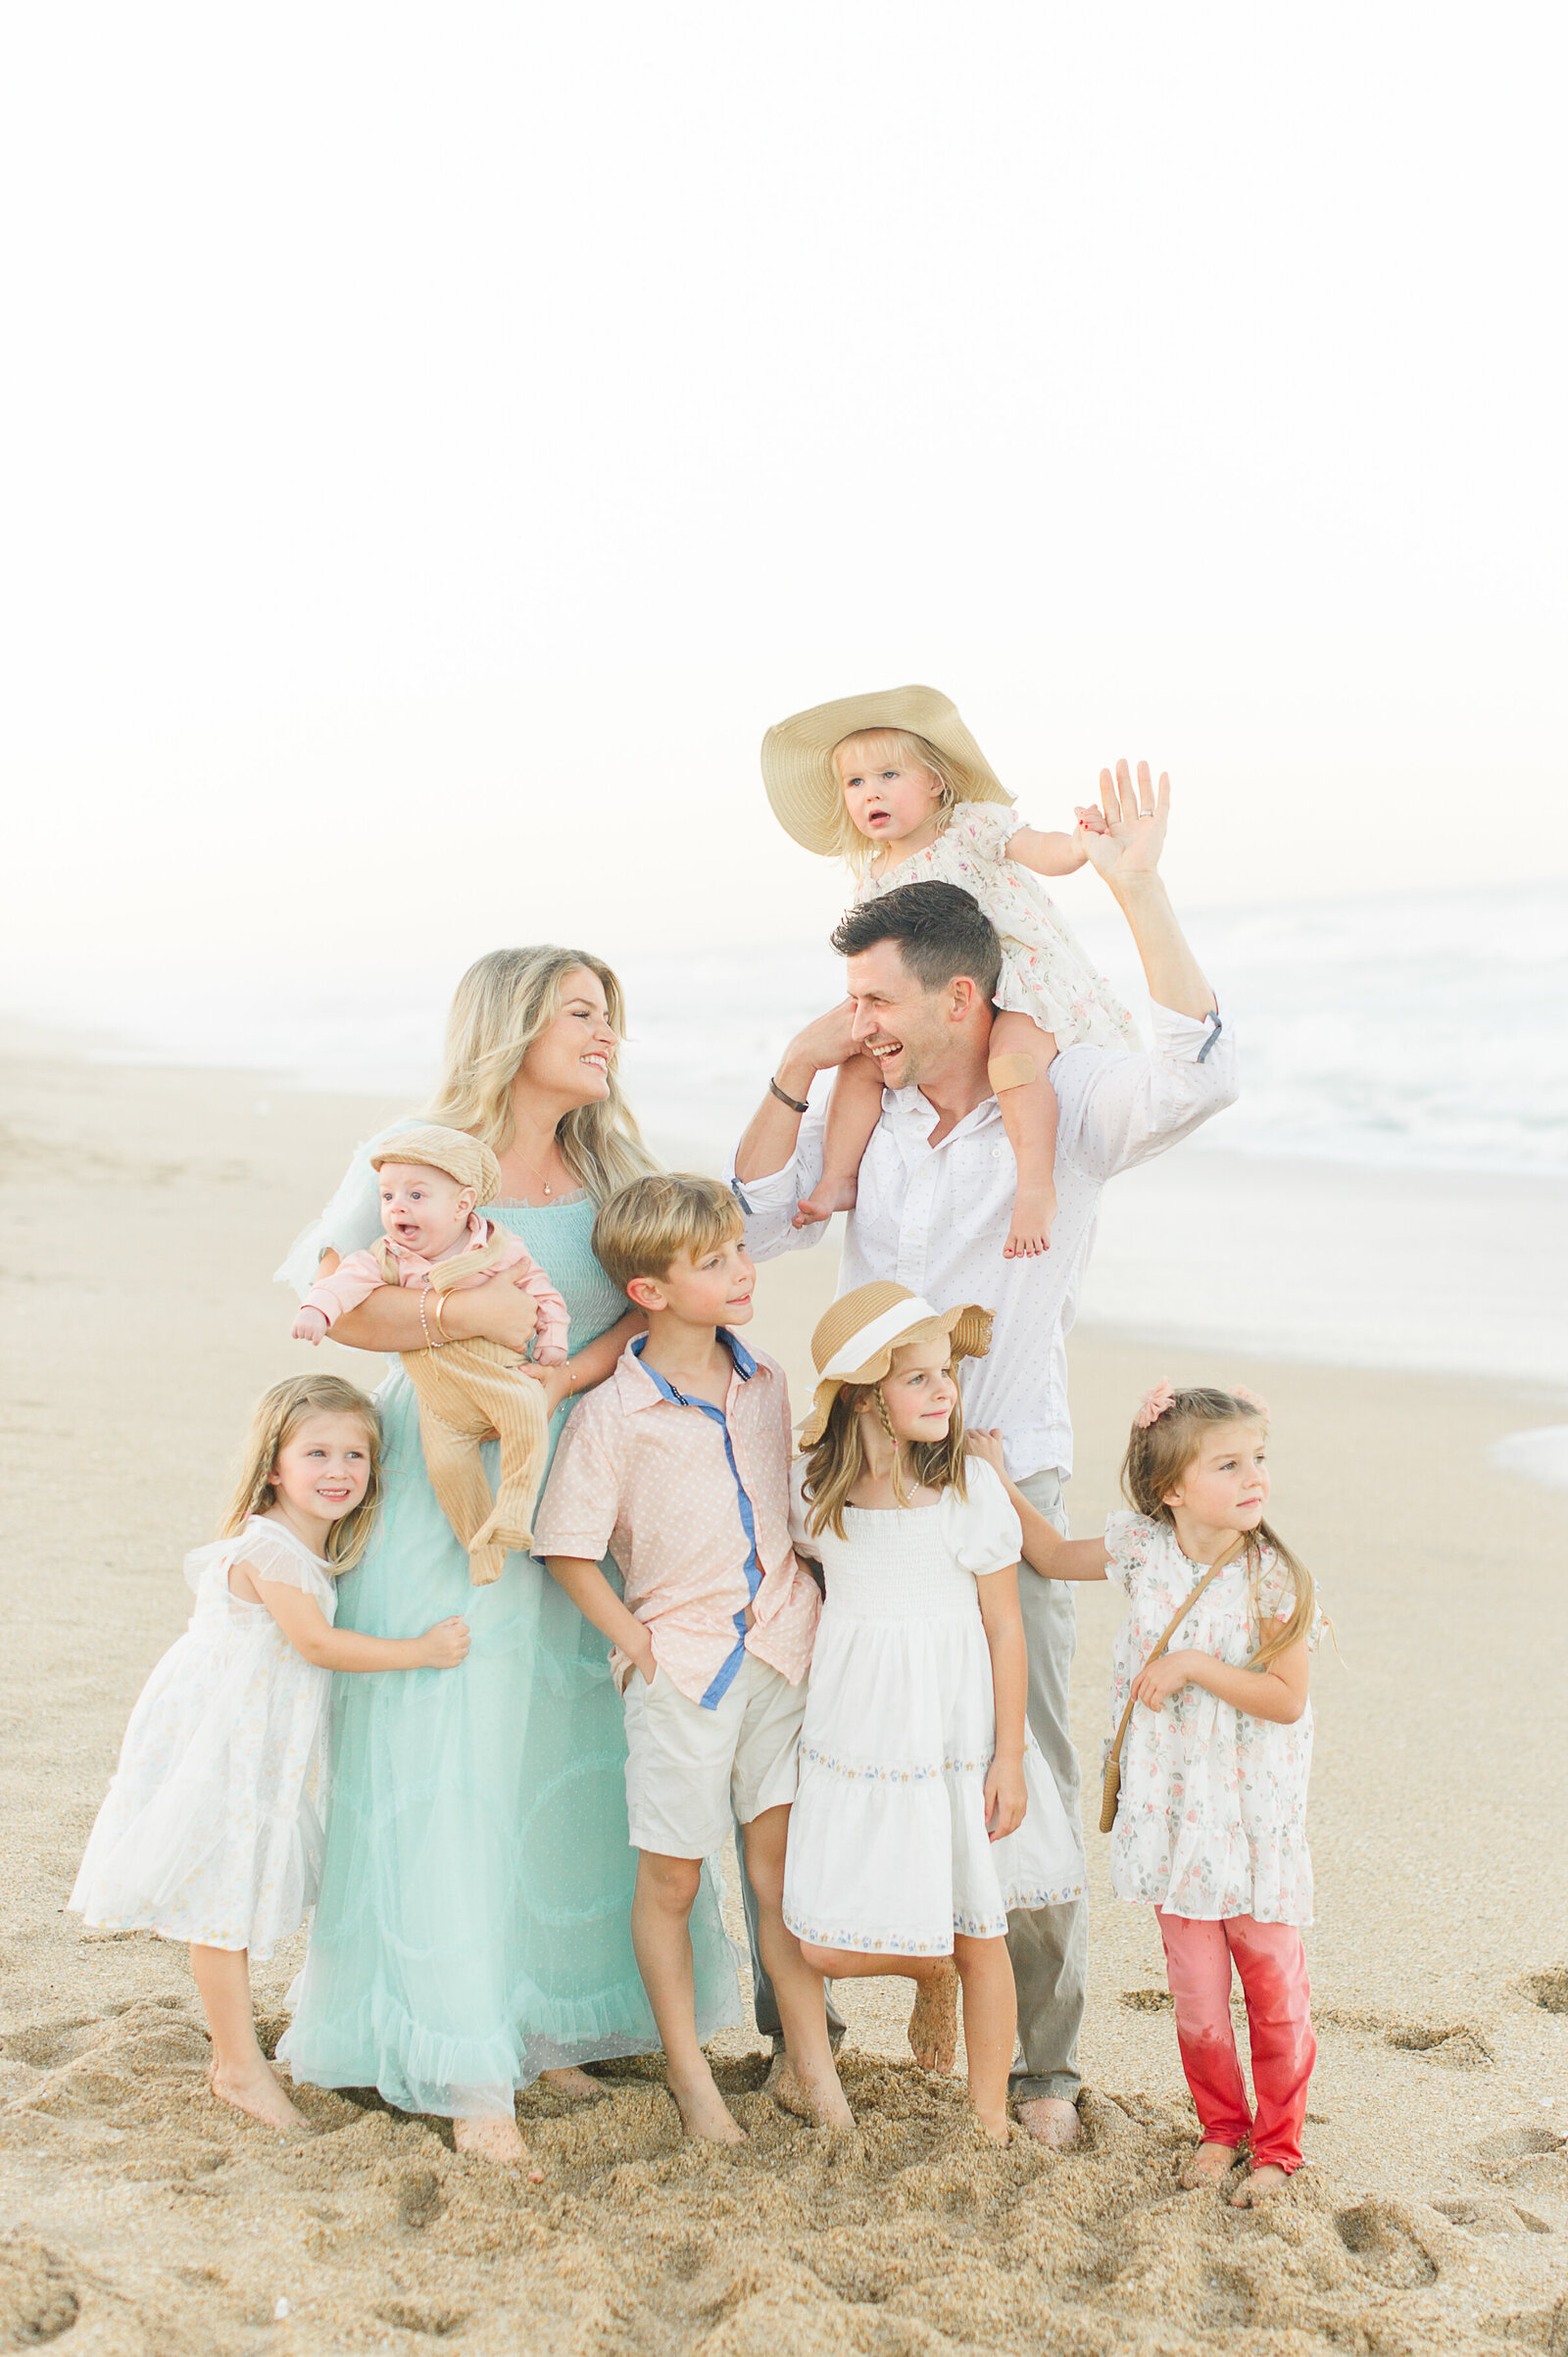 Family of 8 standing on the beach interacting with each other during their family beach session